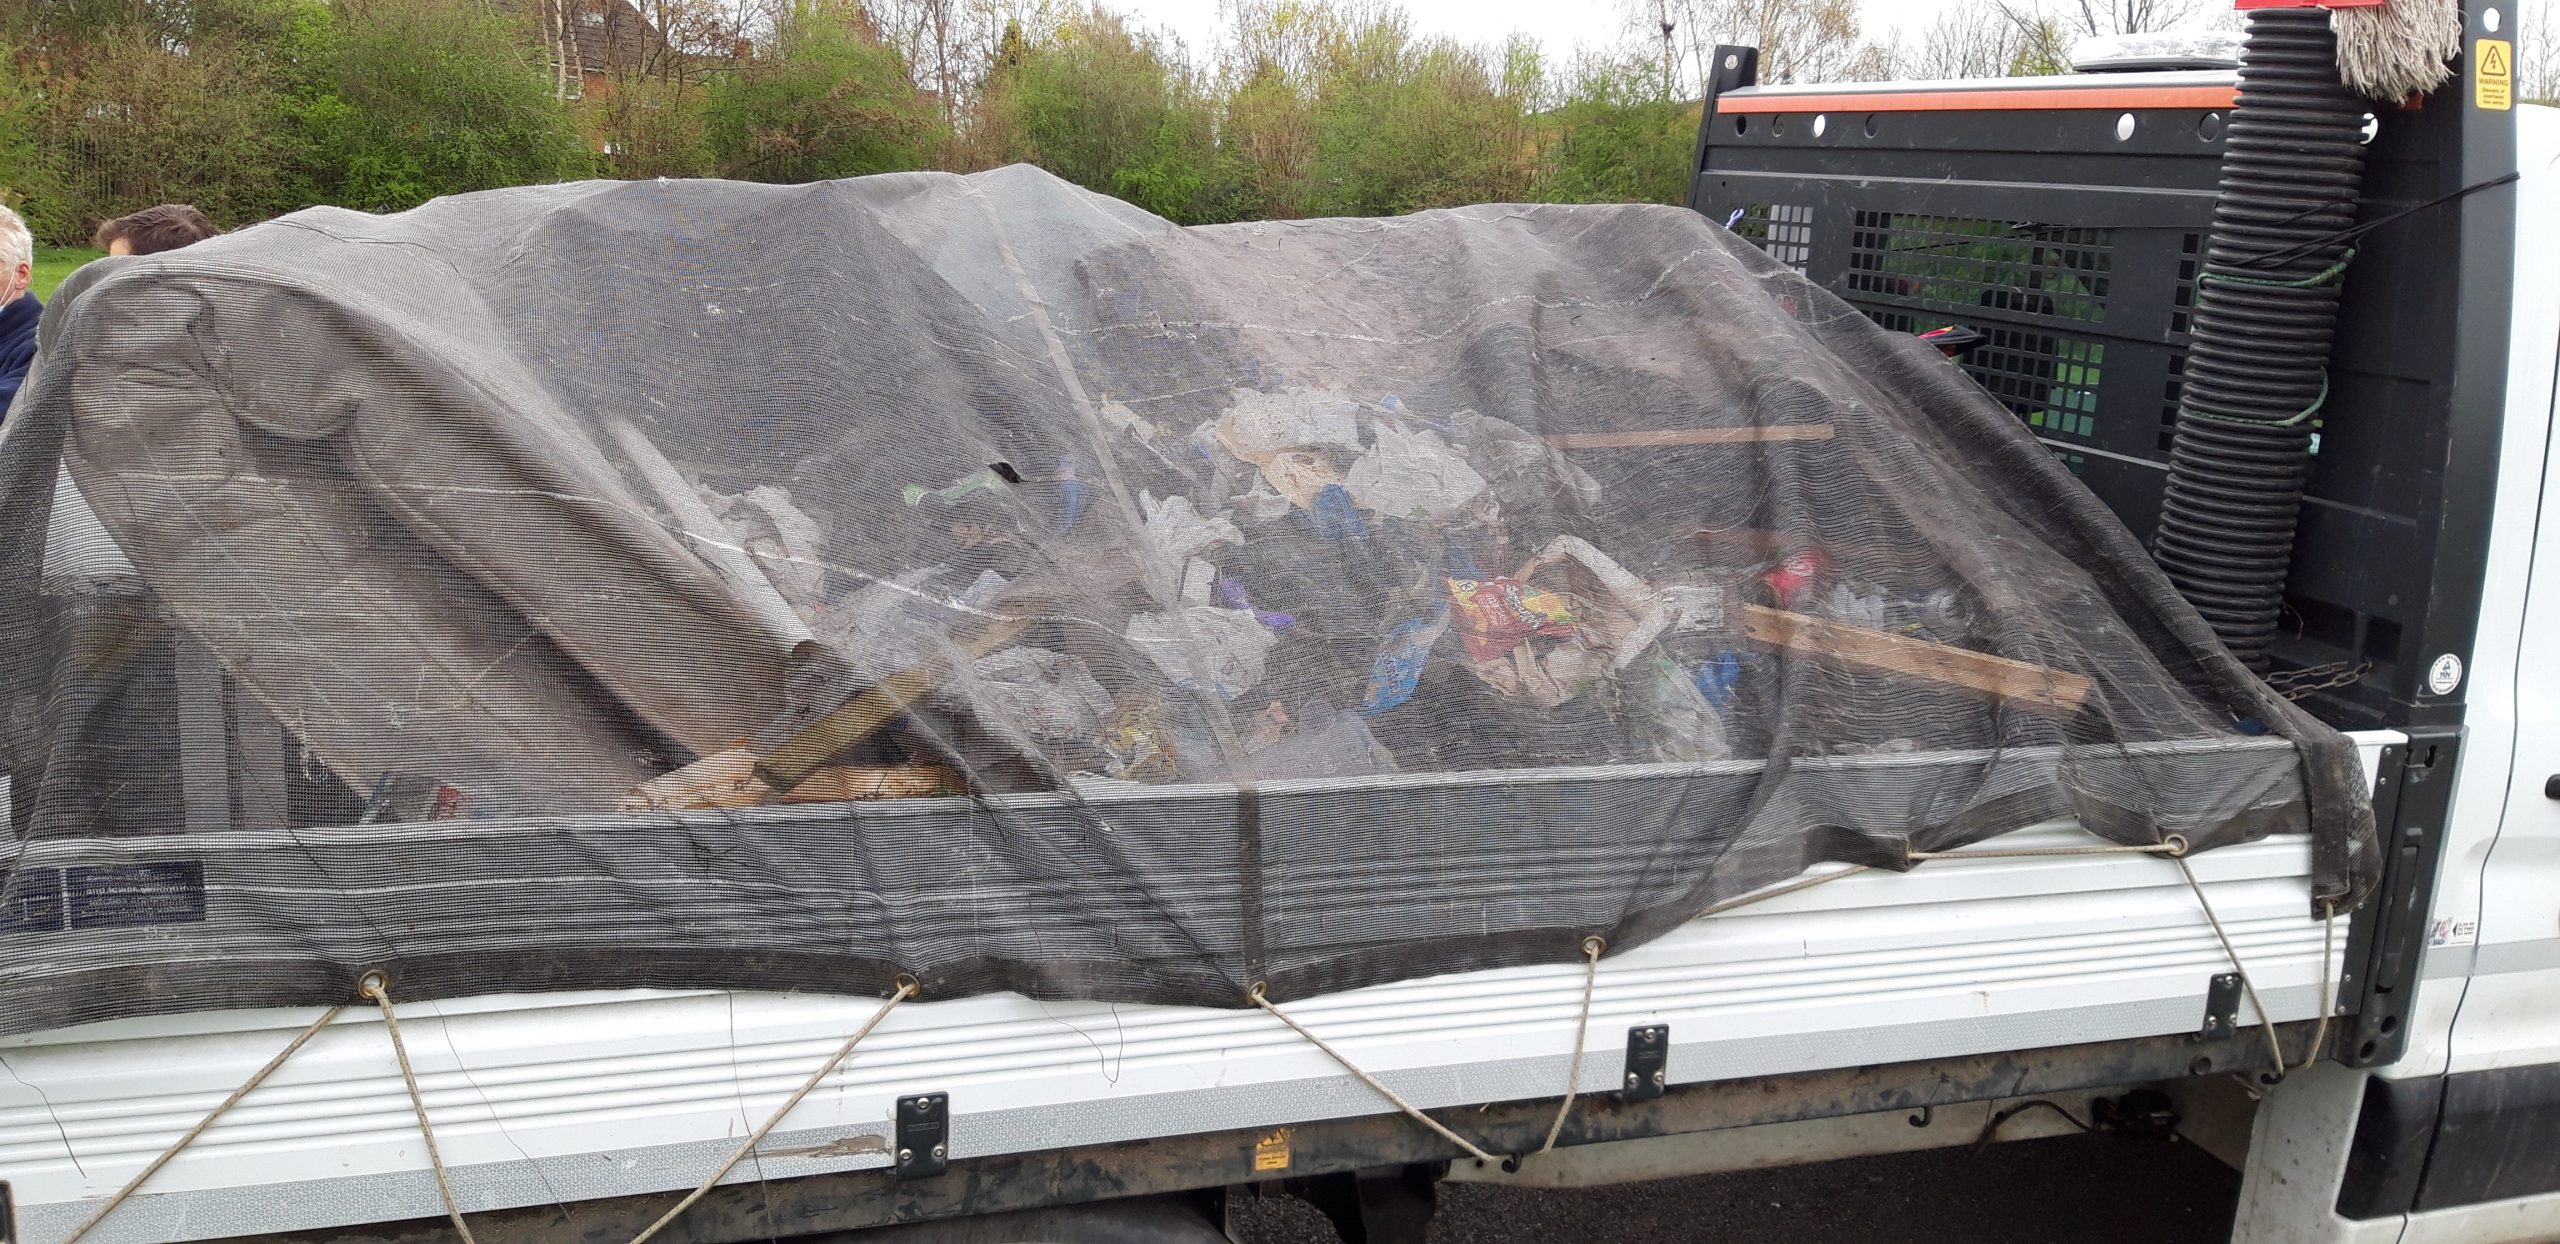 Litter removed from MUGA on a truck